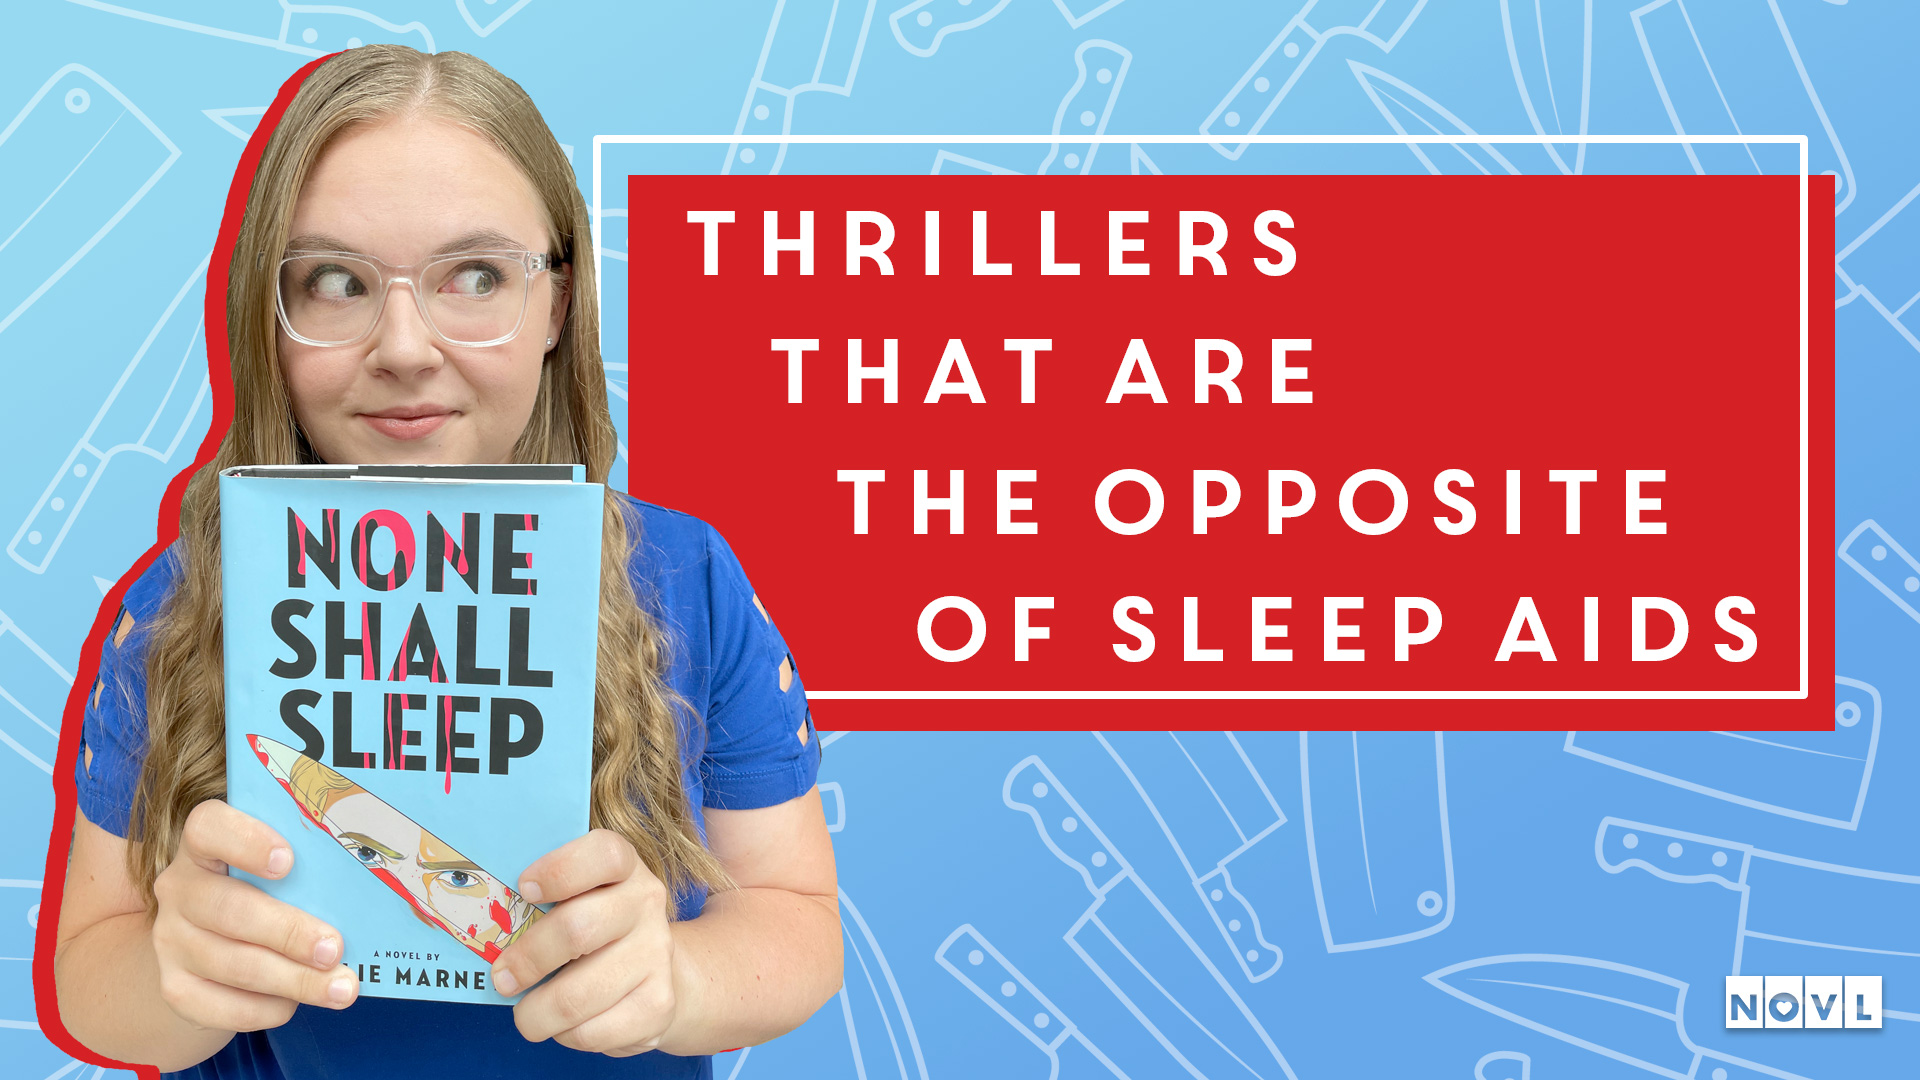 The NOVL Blog, Featured Image for Article: Thrillers That Are the Opposite of Sleep Aids